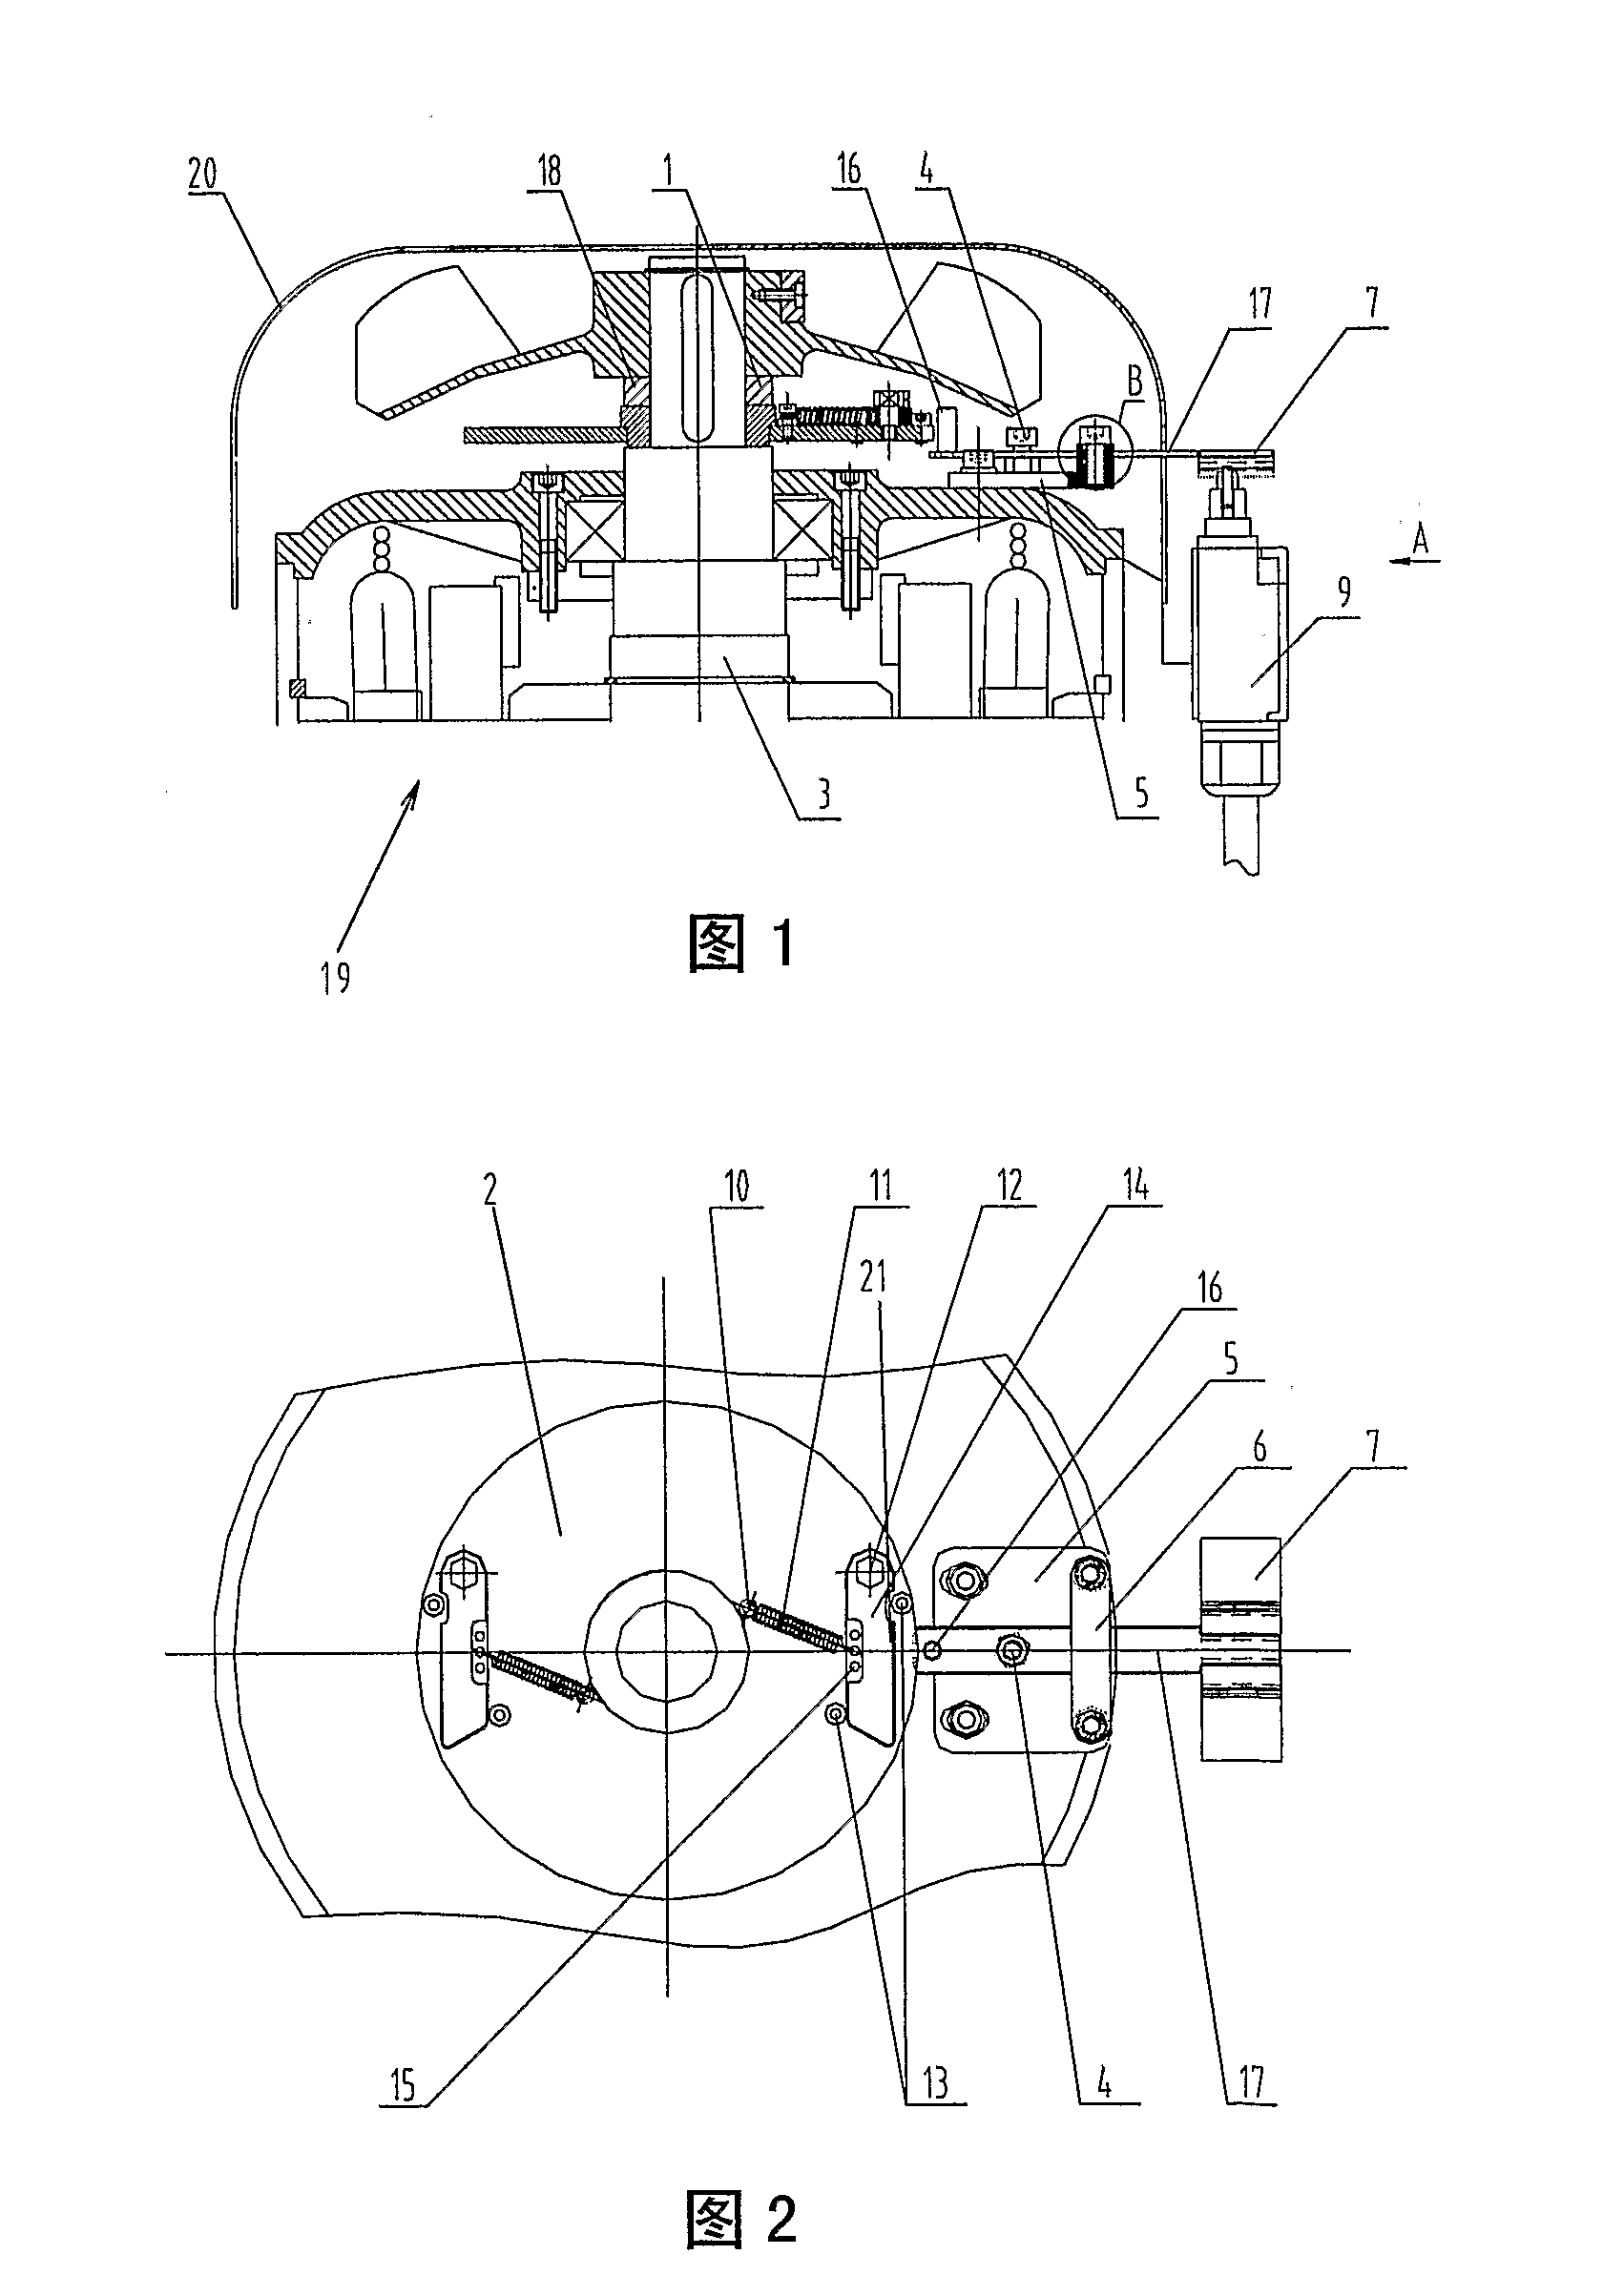 Overspeed protection device for escalator or moving walkway